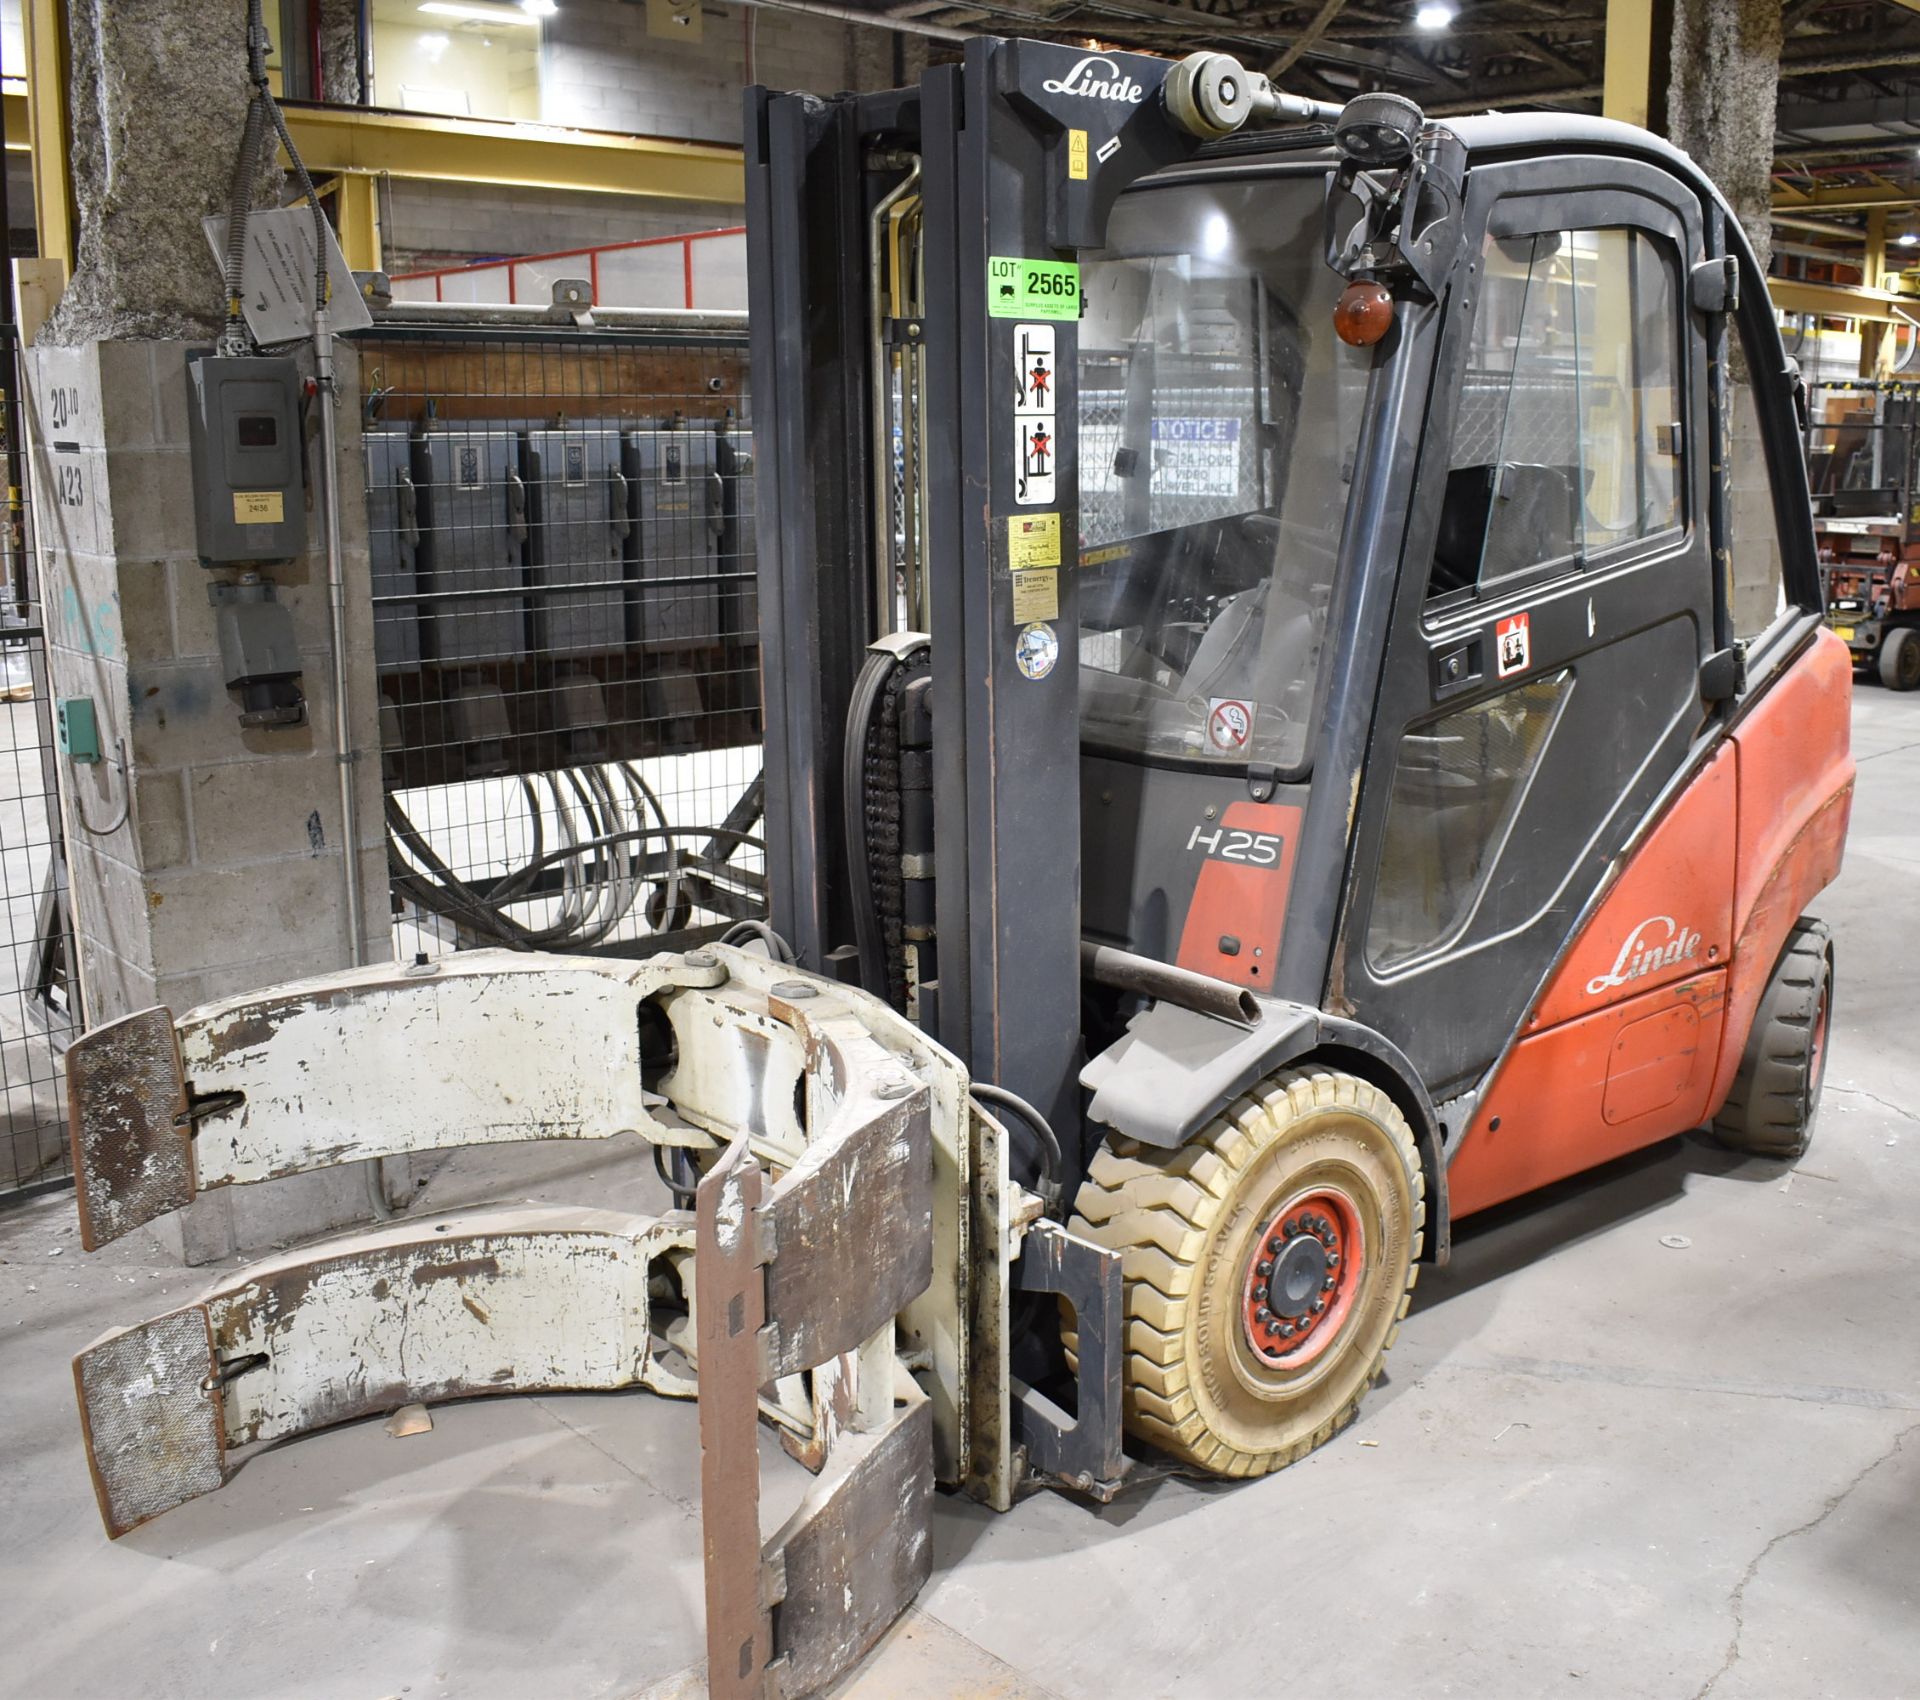 LINDE (2005) H25T 3,410 LB. CAPACITY LPG FORKLIFT WITH 183.5" MAX. LIFT HEIGHT, 2-STAGE MAST,